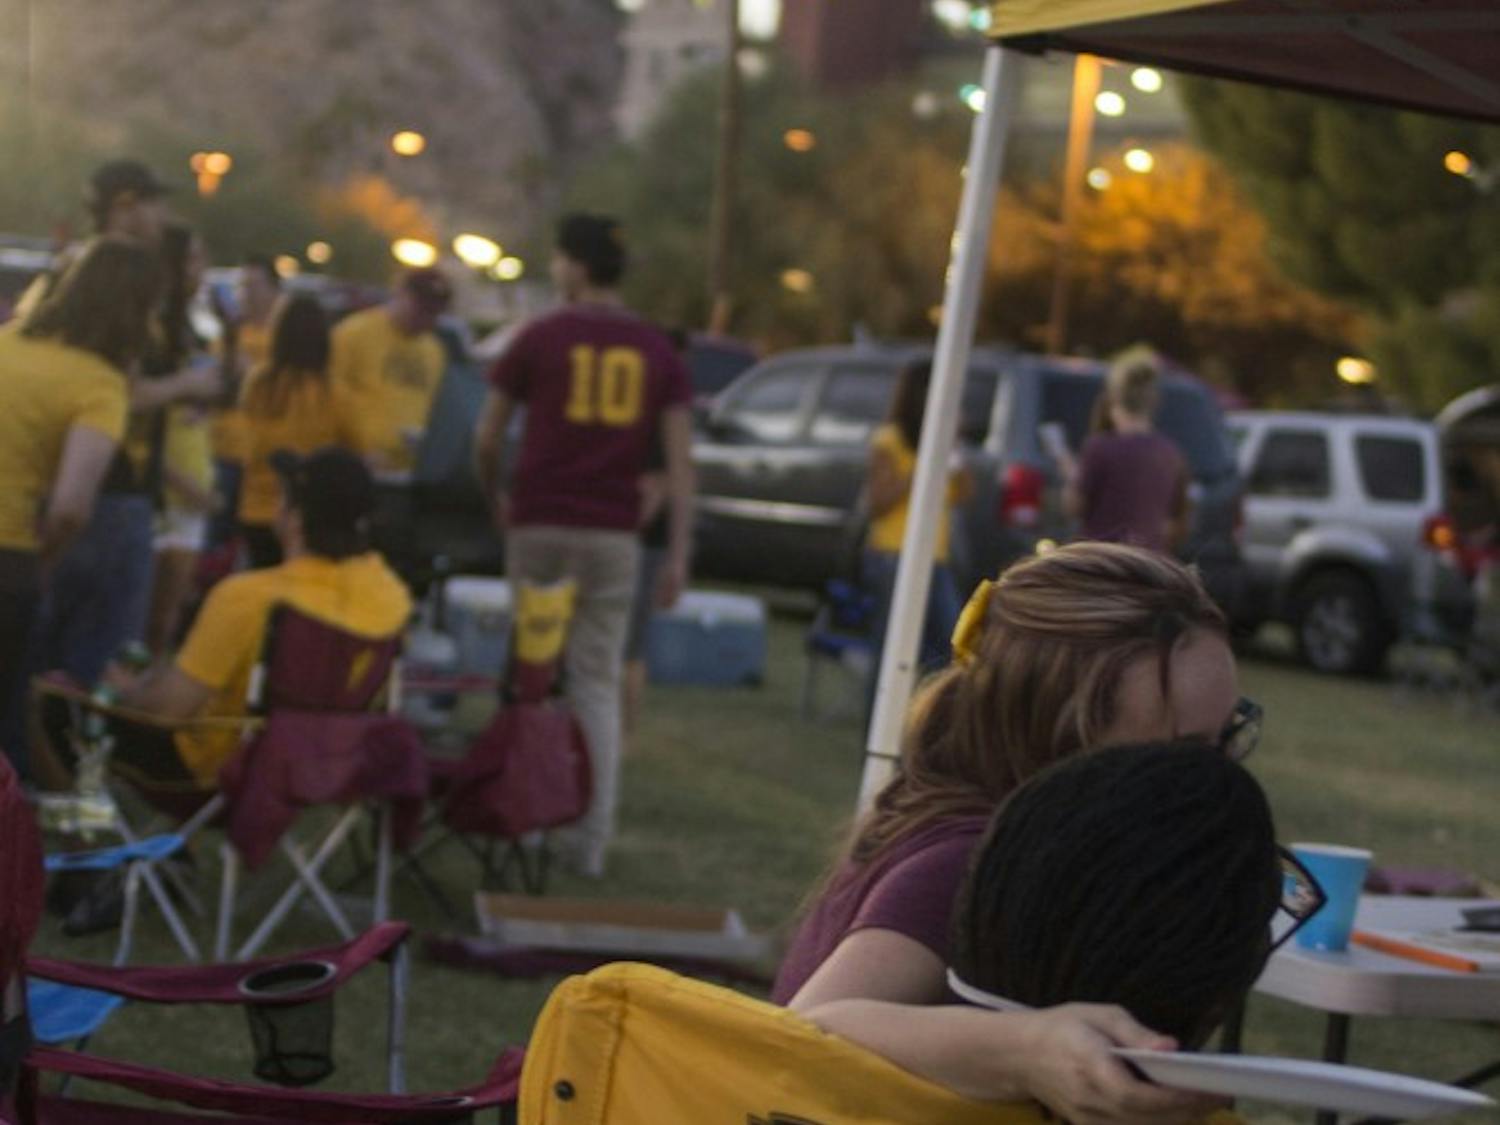 ASU's tailgating atmosphere. Photo by Jessica Obert